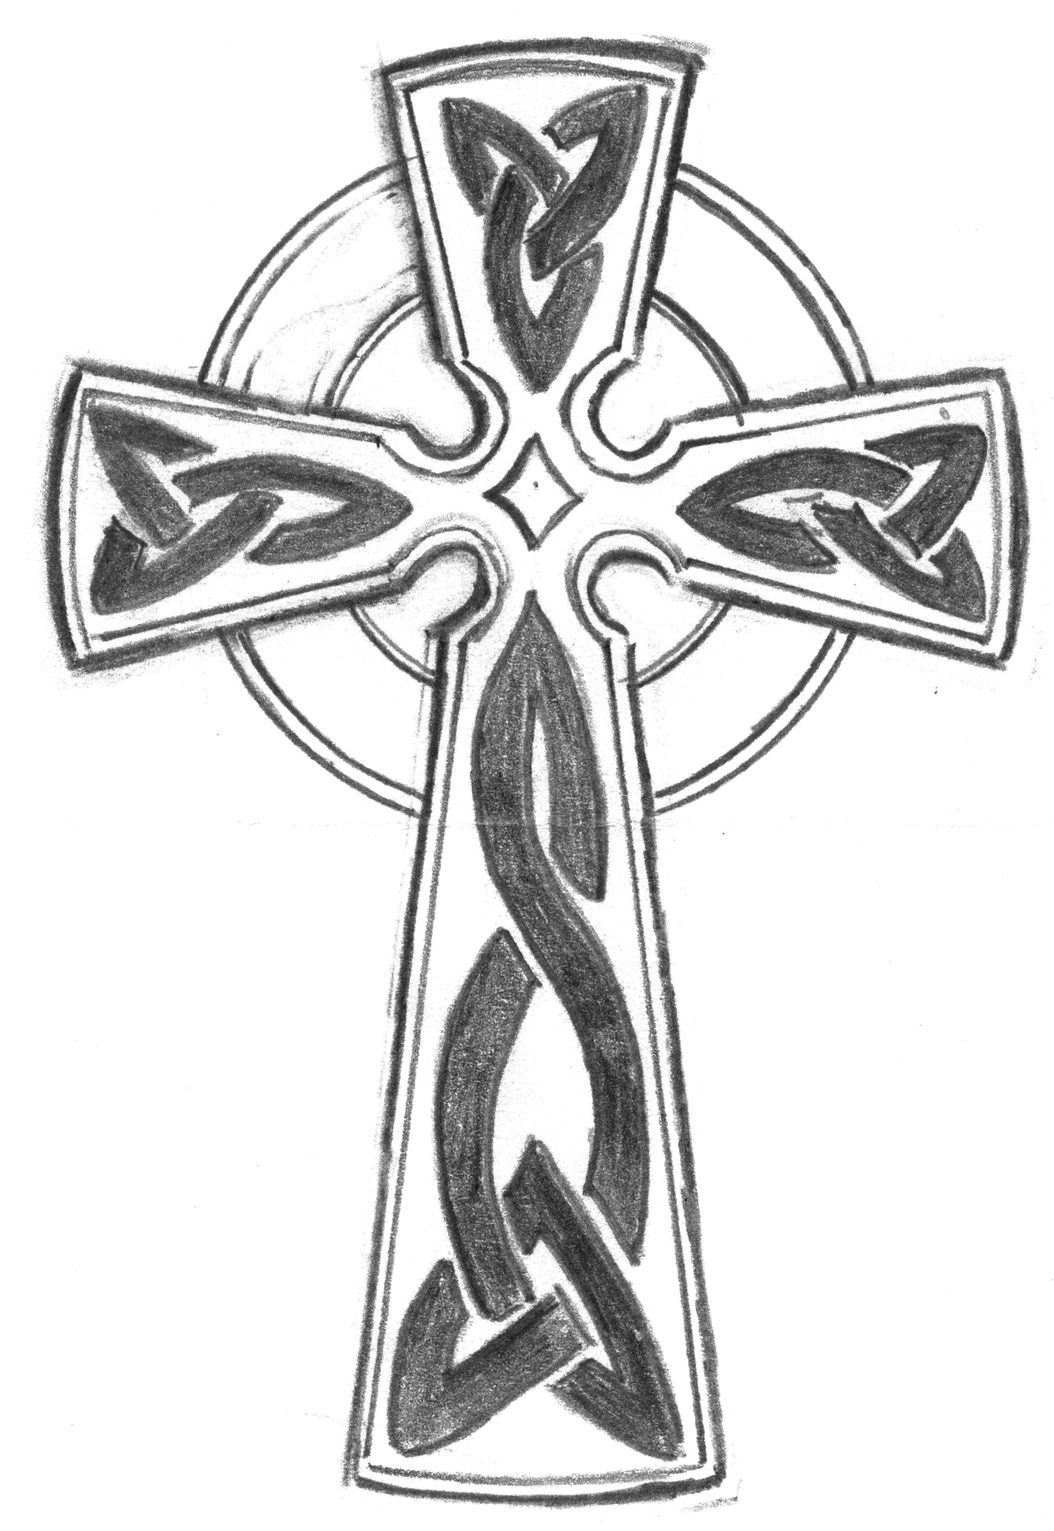 Gallery For > Infinity Cross Tattoo Sketches